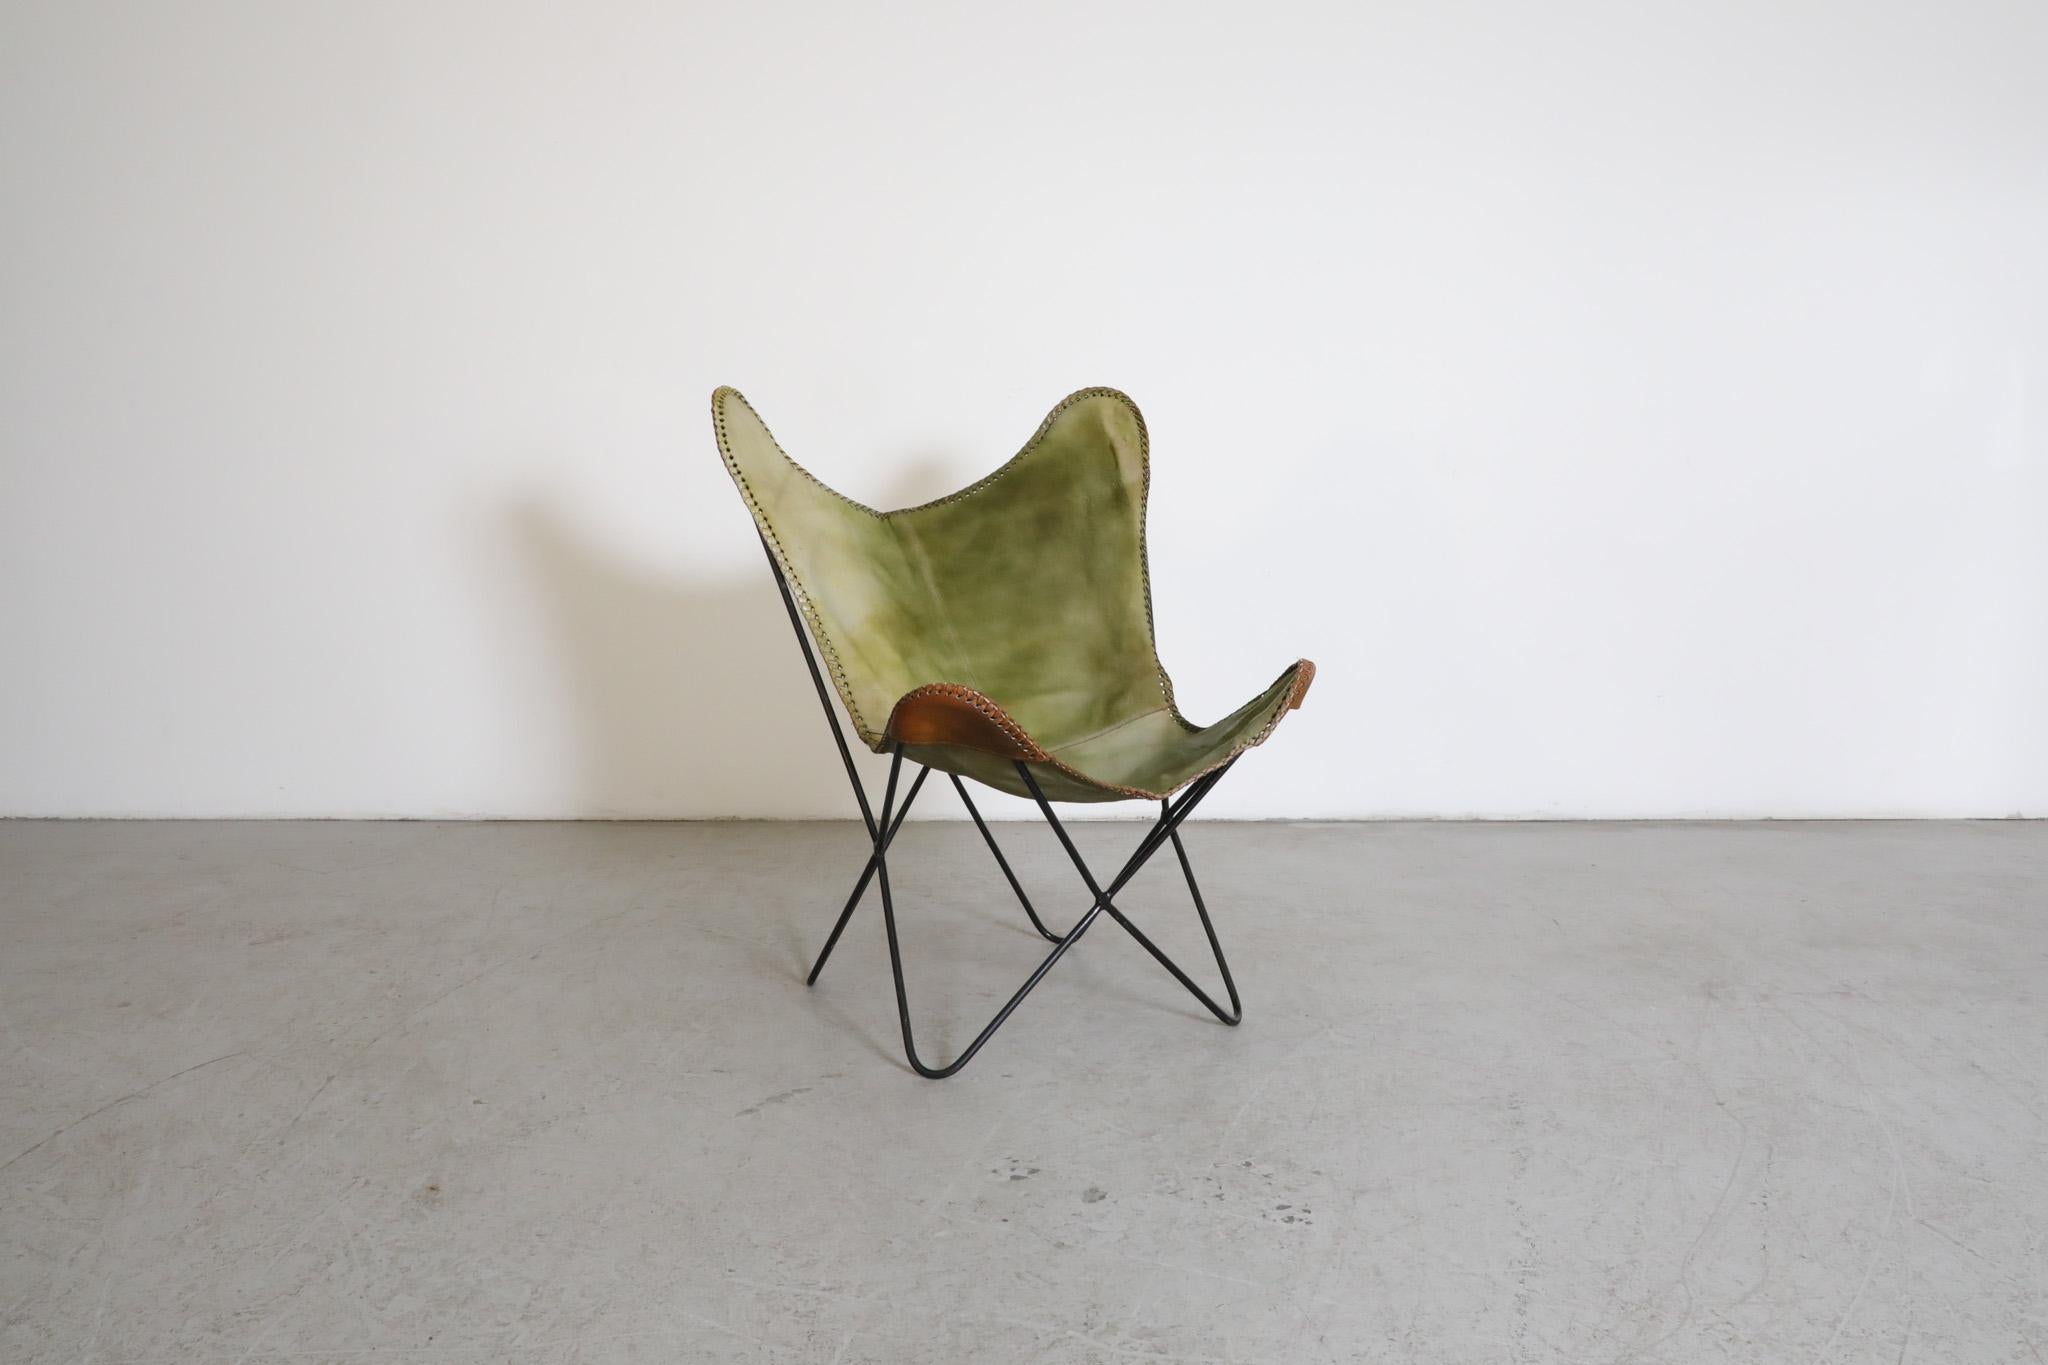 Mid-Century Jorge Ferrari-Hardoy attributed butterfly lounge chair with black enameled metal wire frame. The sling seat is crafted in faux green and brown leather an with woven edging. A comfortable and lightweight lounge with hand stitching and